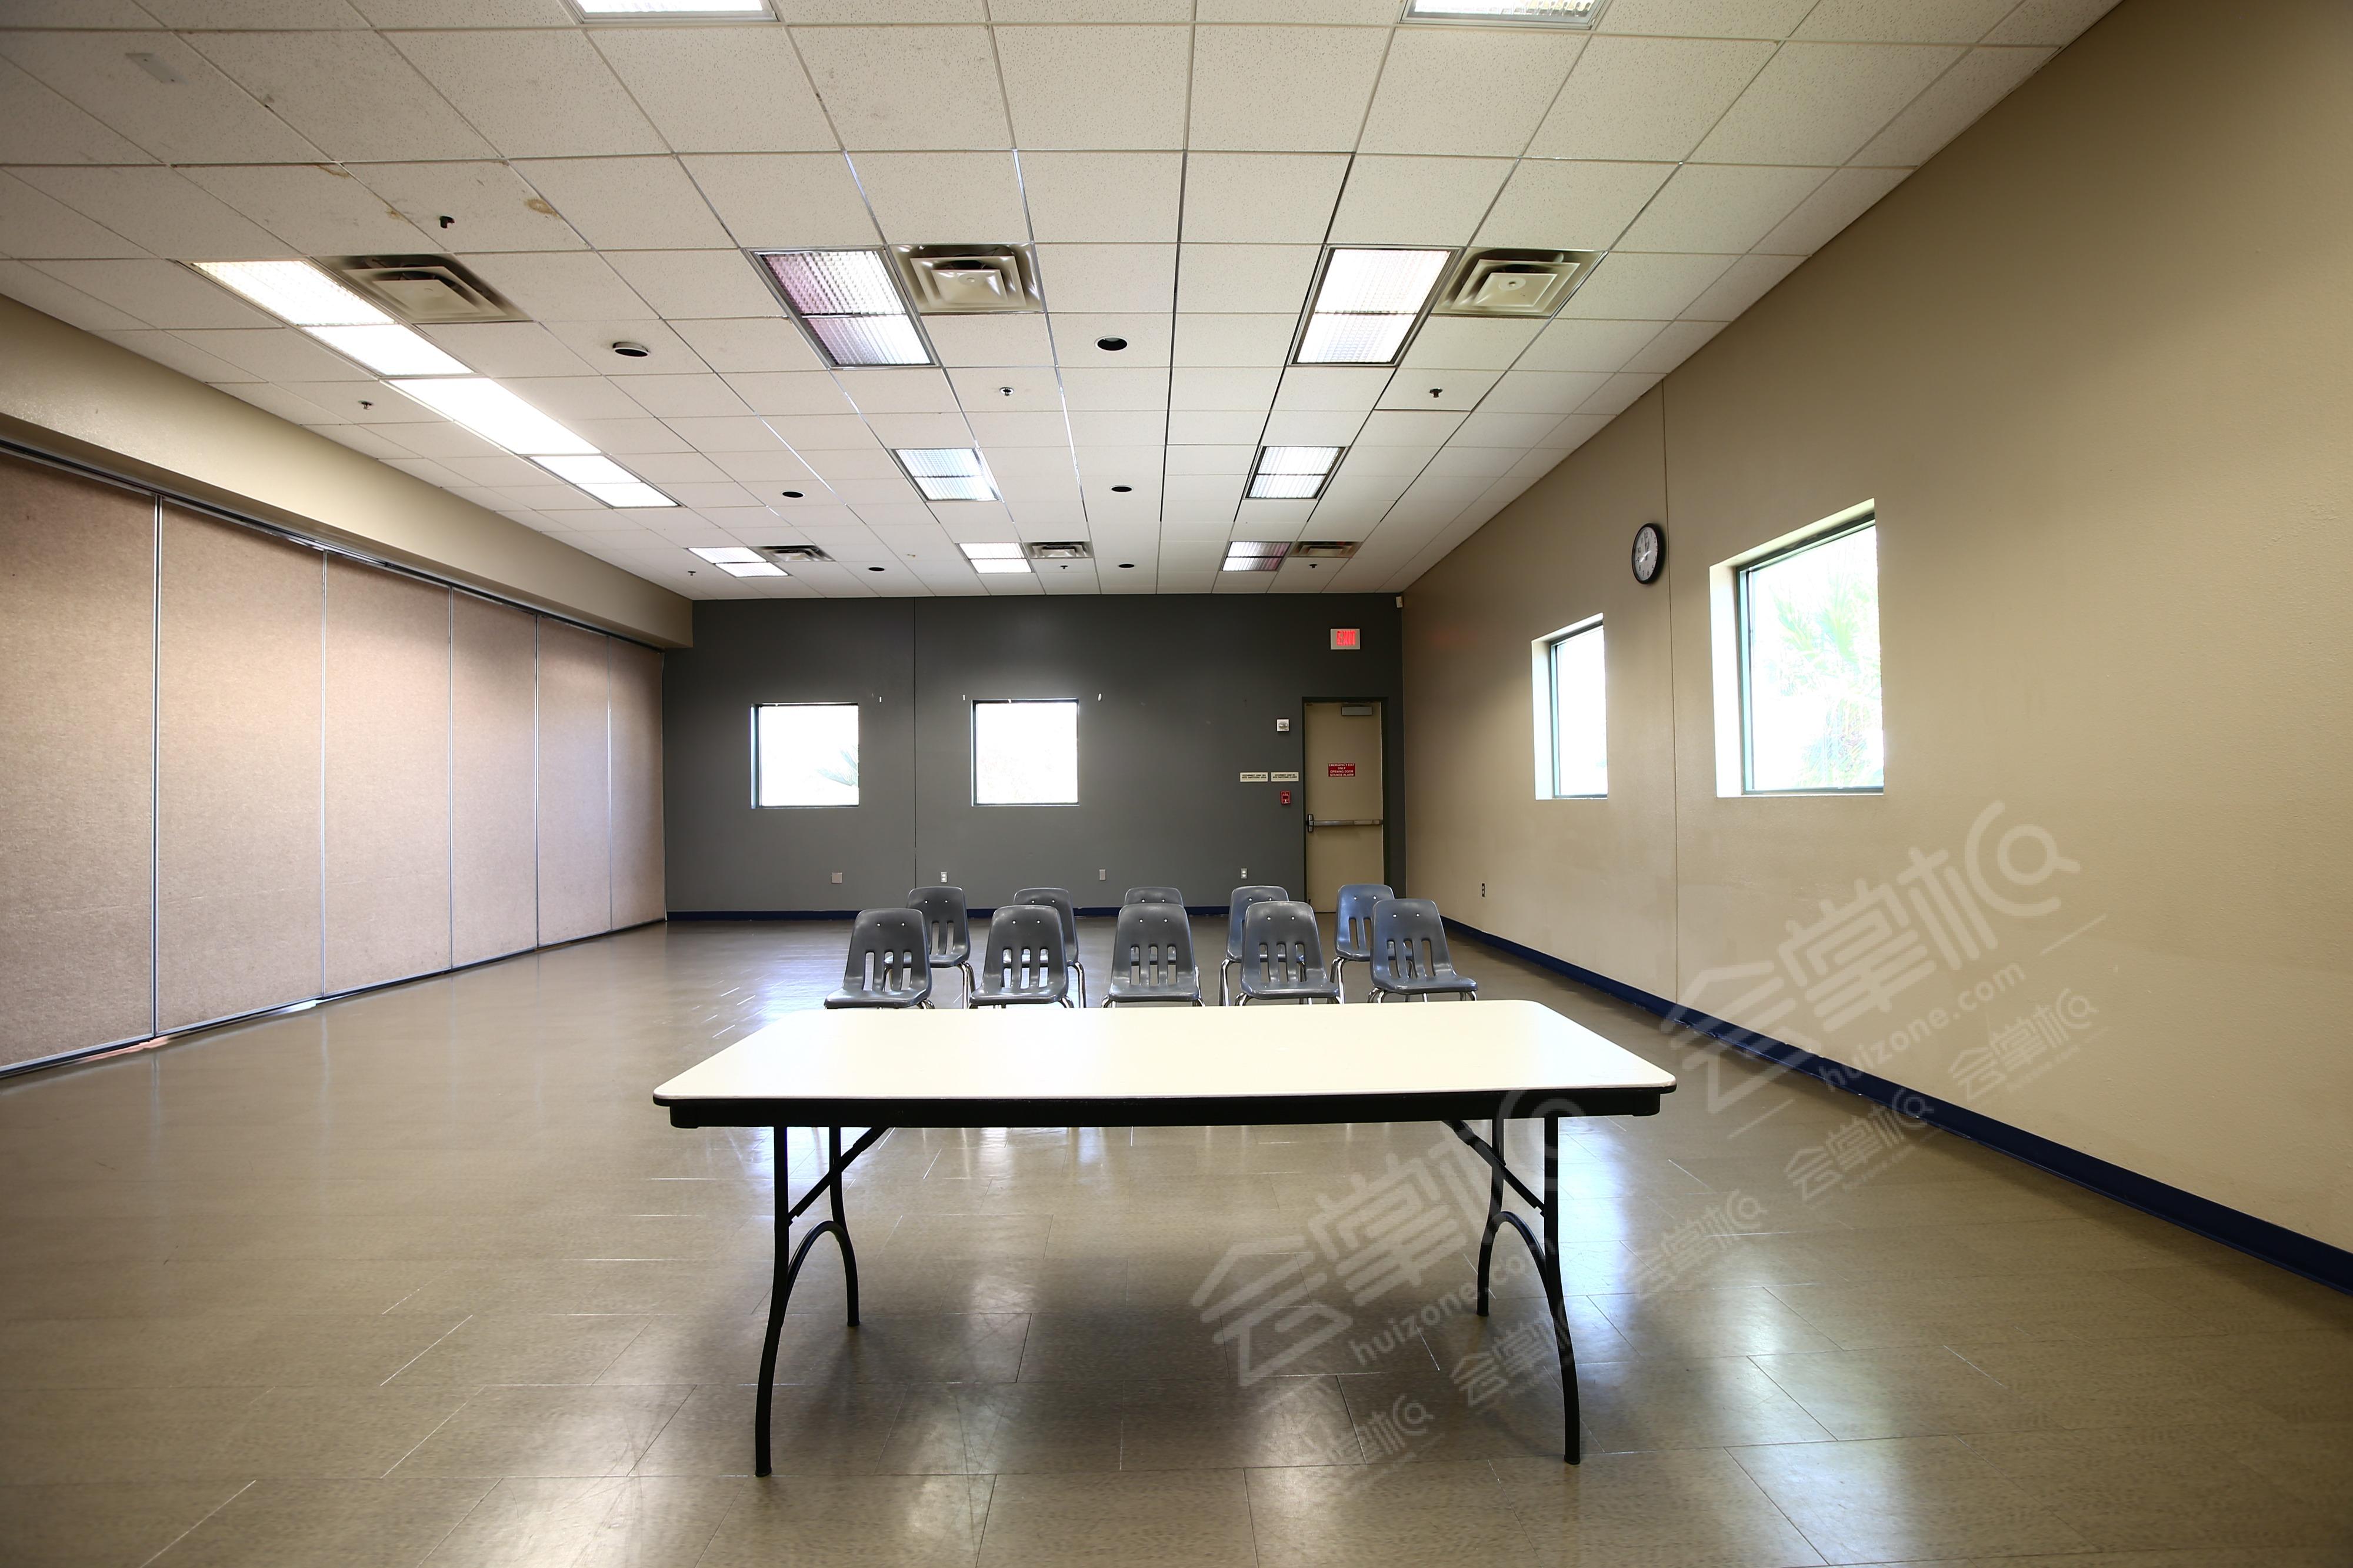 Multi-Purpose Room For An Affordable Event or Meeting